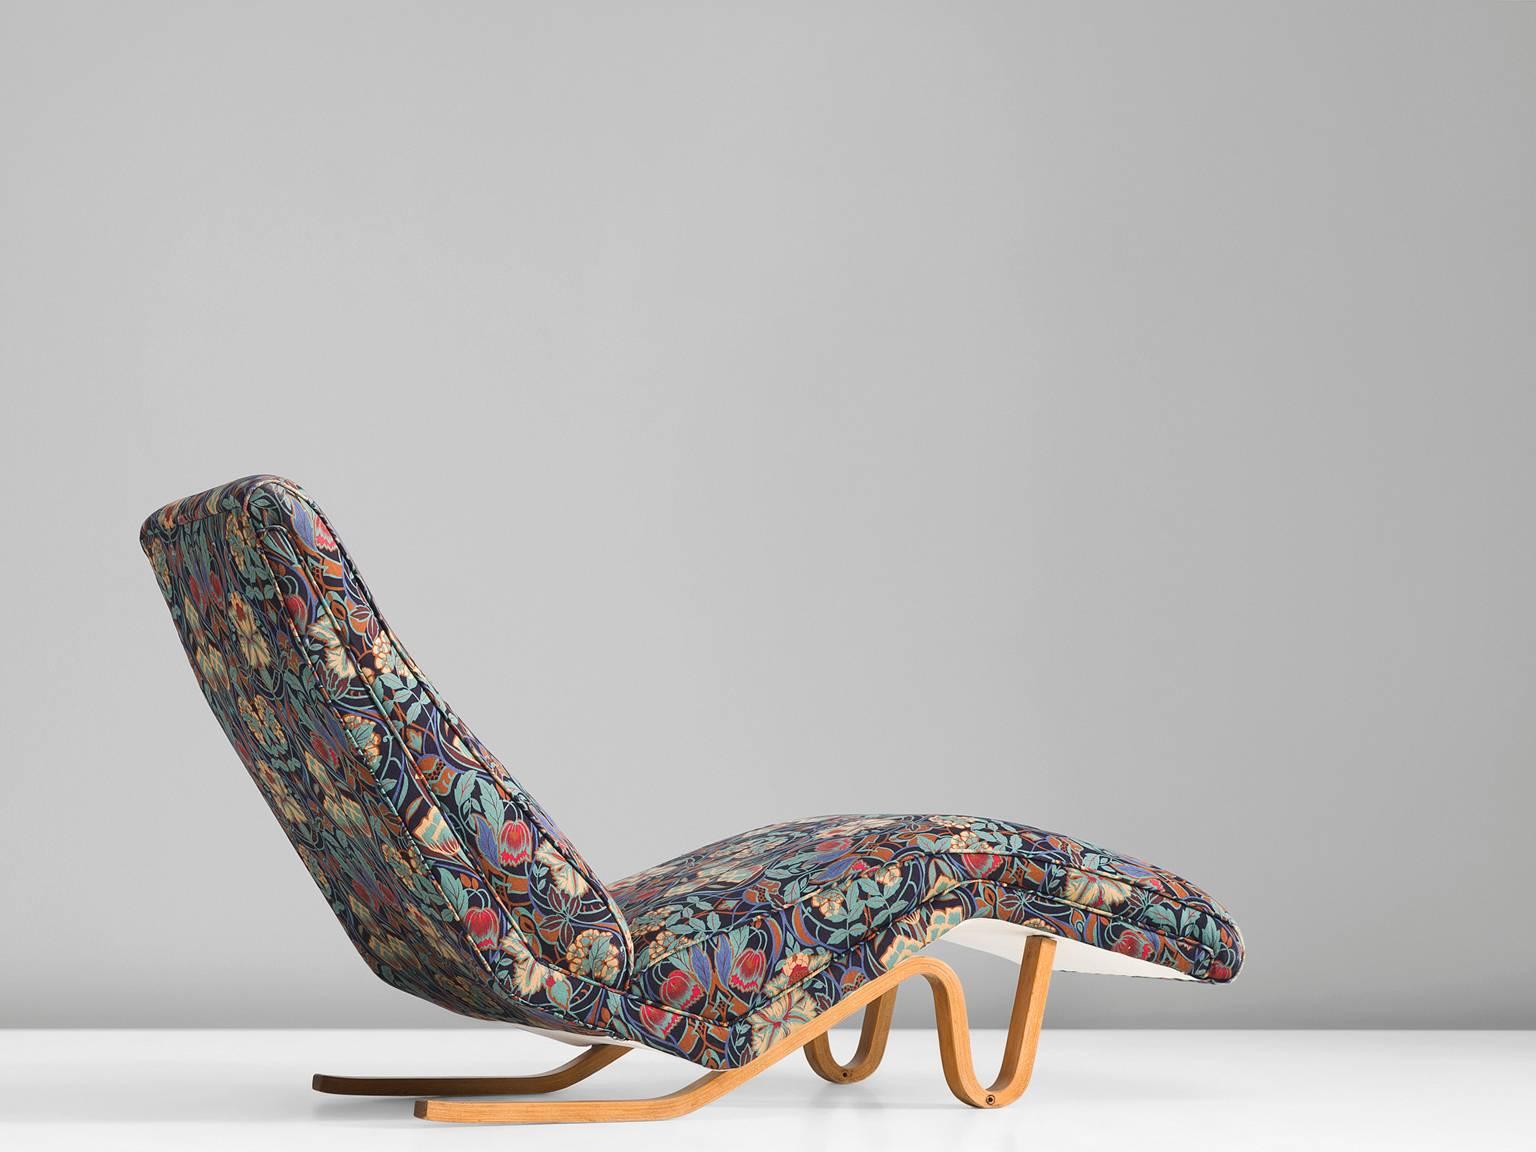 Chaise longue, in beech and fabric, by Andre J. Milne, United Kingdom, 1950s.

This chaise longue is designed by the Englishman Andrew J. Milne. The bent beech legs form two waved shapes. The legs are what give this daybed its distinctive